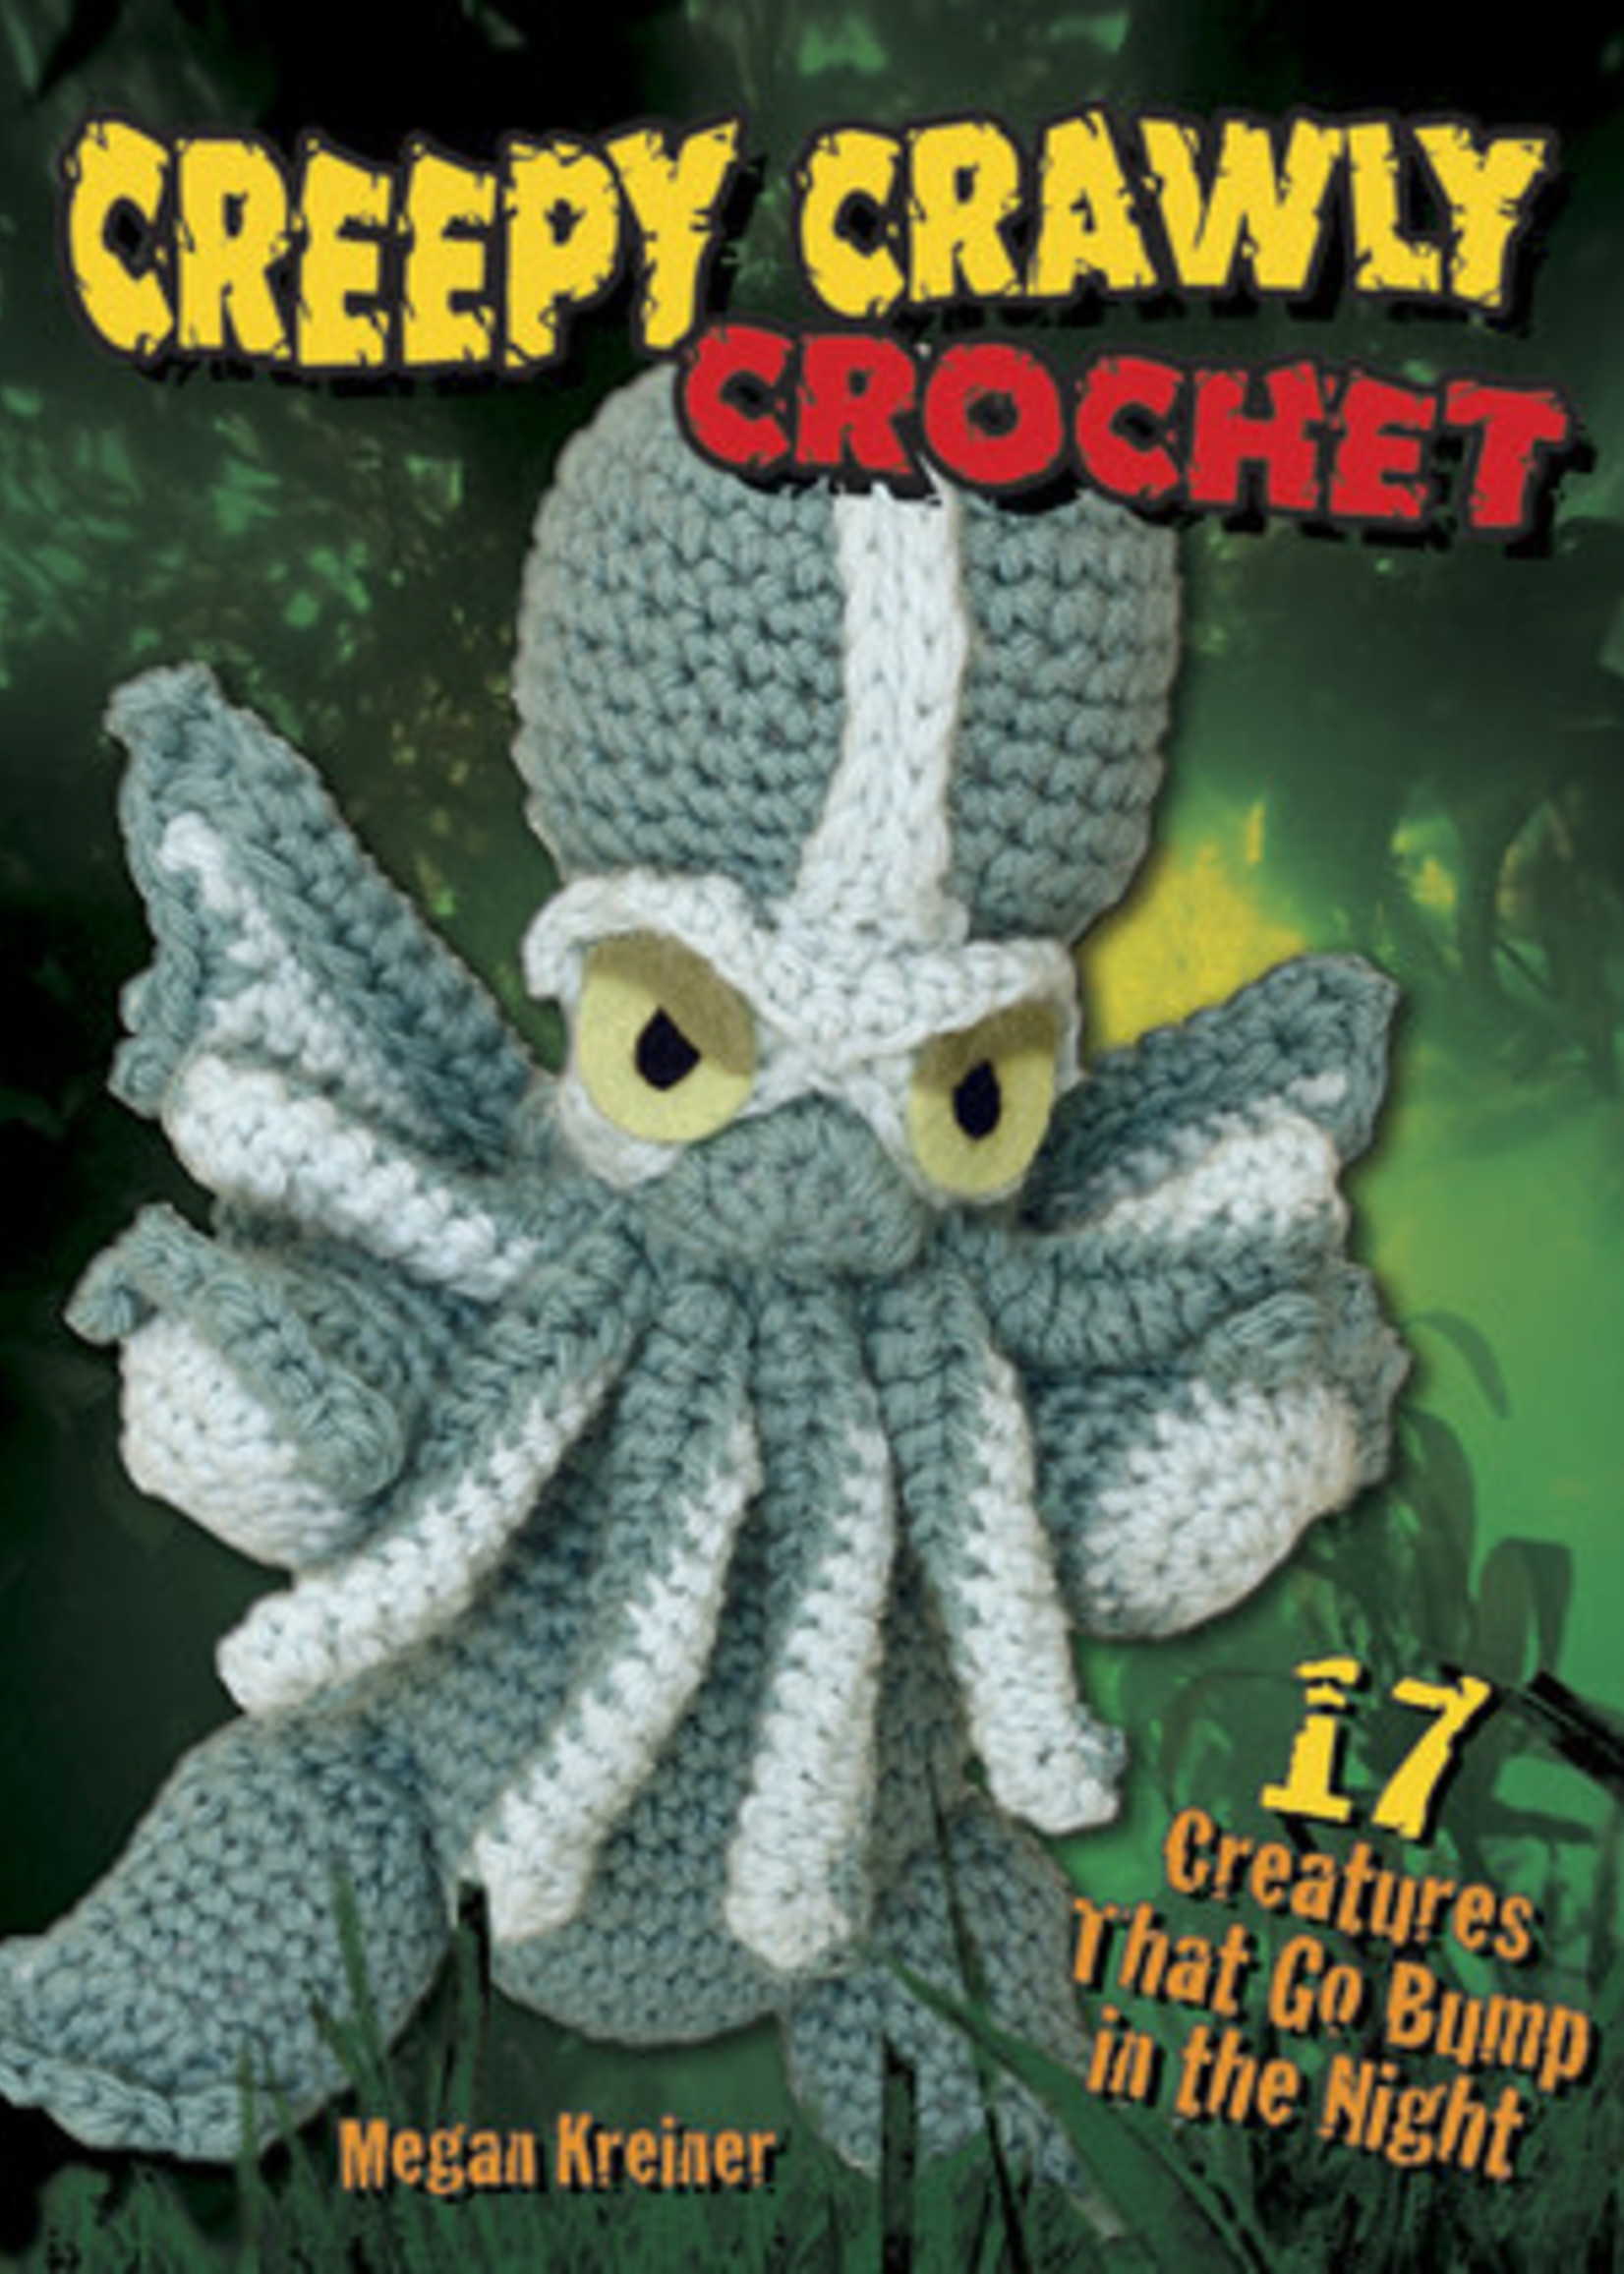 Creepy Crawly Crochet: 17 Creatures That Go Bump in the Night by Megan Kreiner